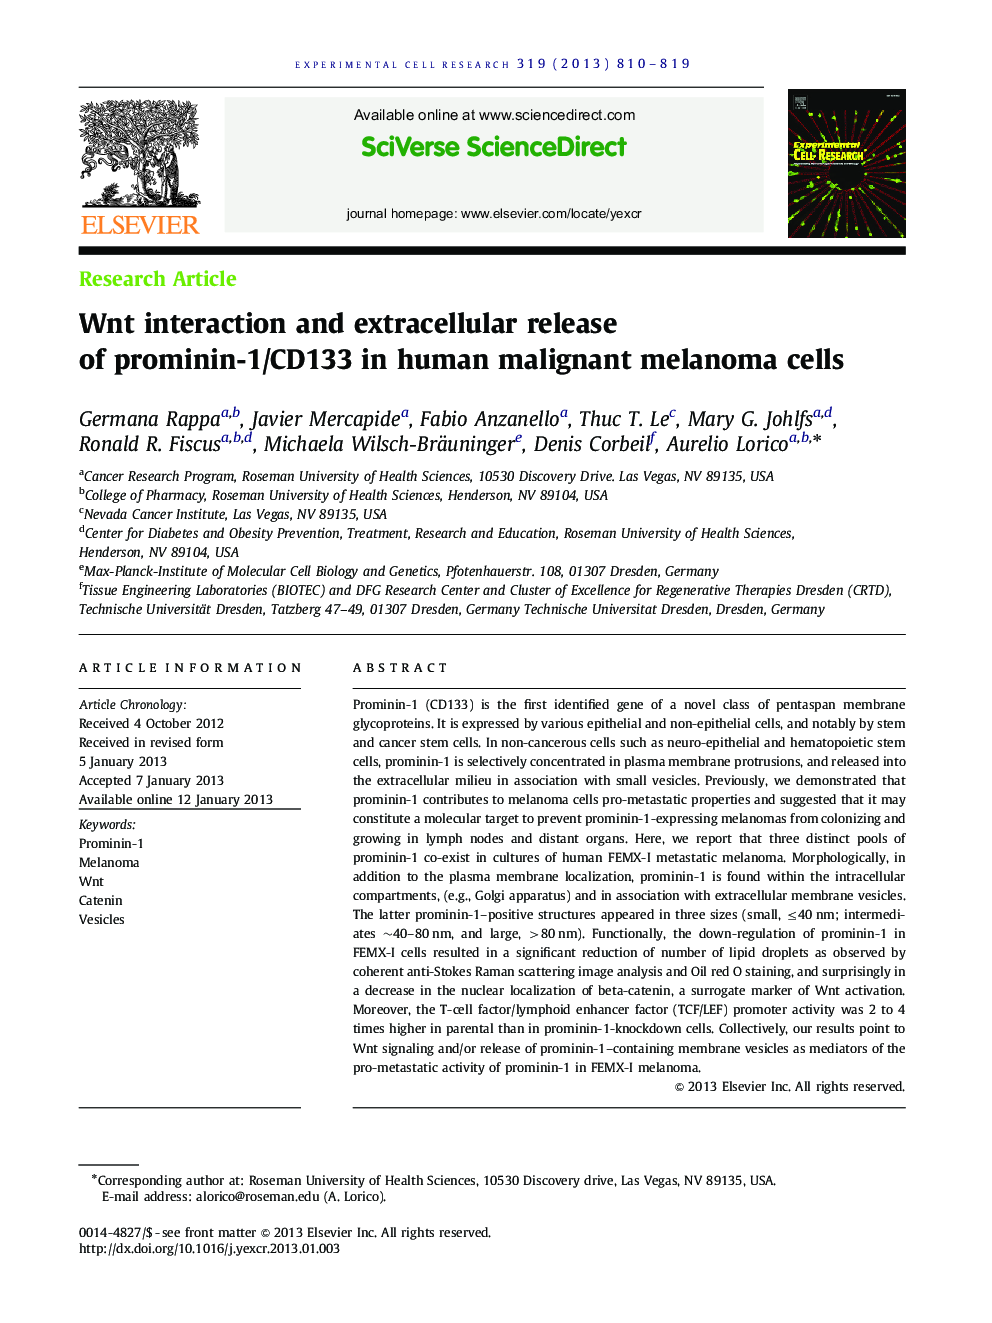 Wnt interaction and extracellular release of prominin-1/CD133 in human malignant melanoma cells